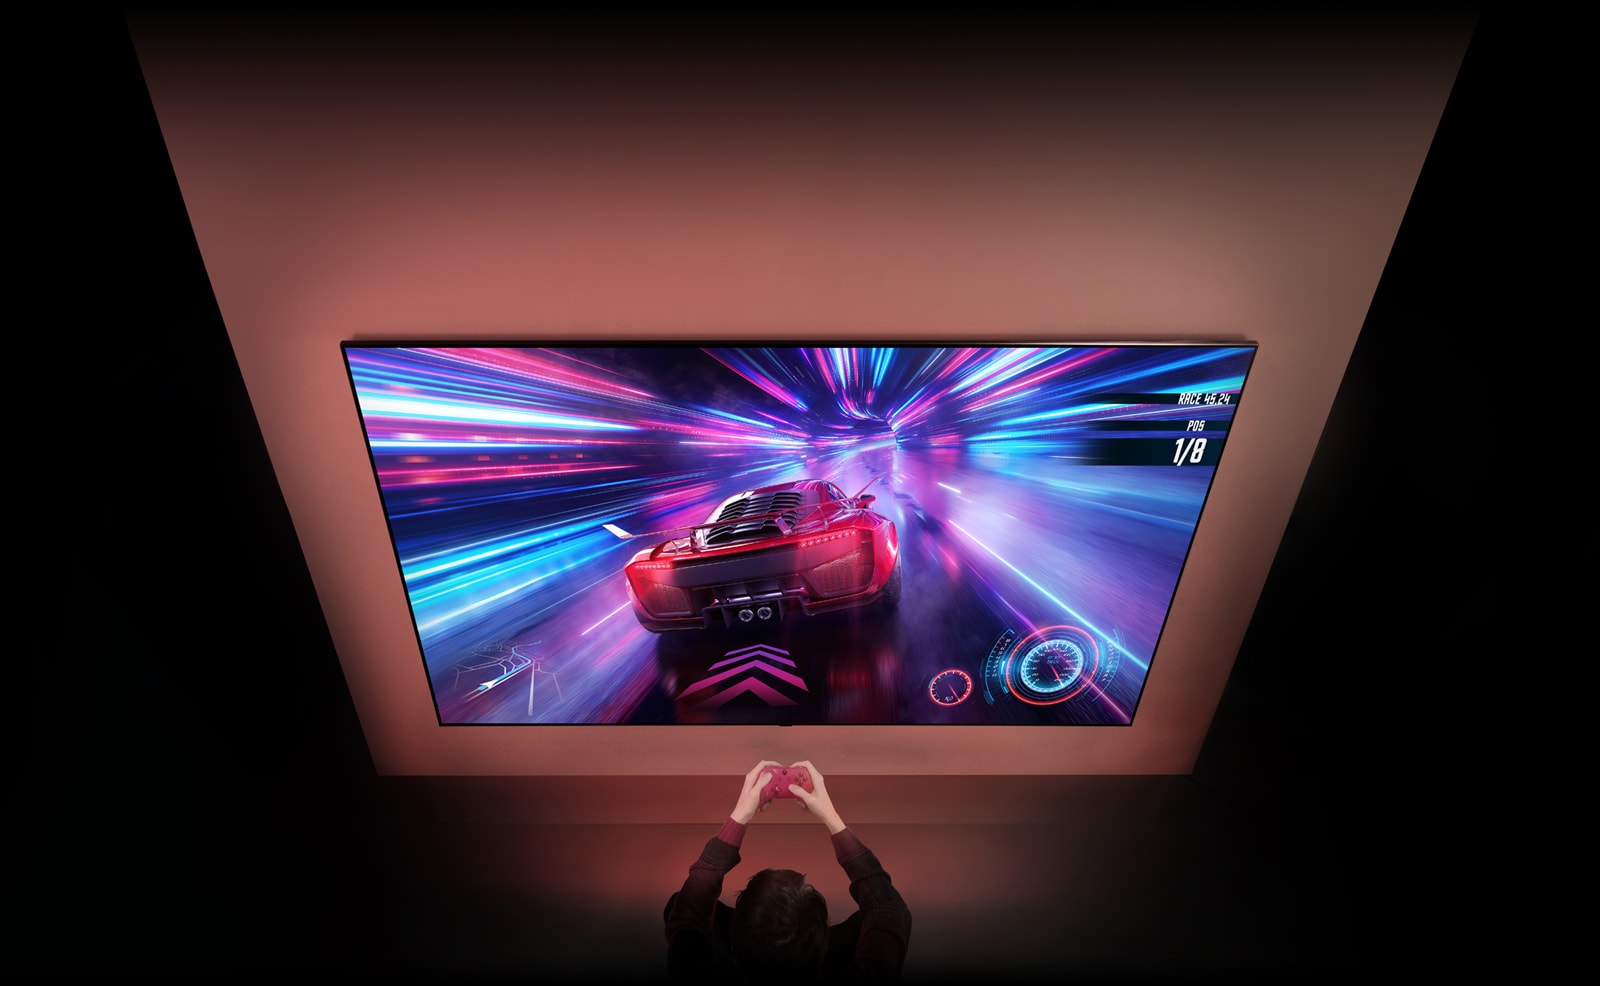 There is a big TV on the wall and you can see the racing game screen in the screen. In front of the TV, you can see the hands and controllers of the person who focuses on the game.